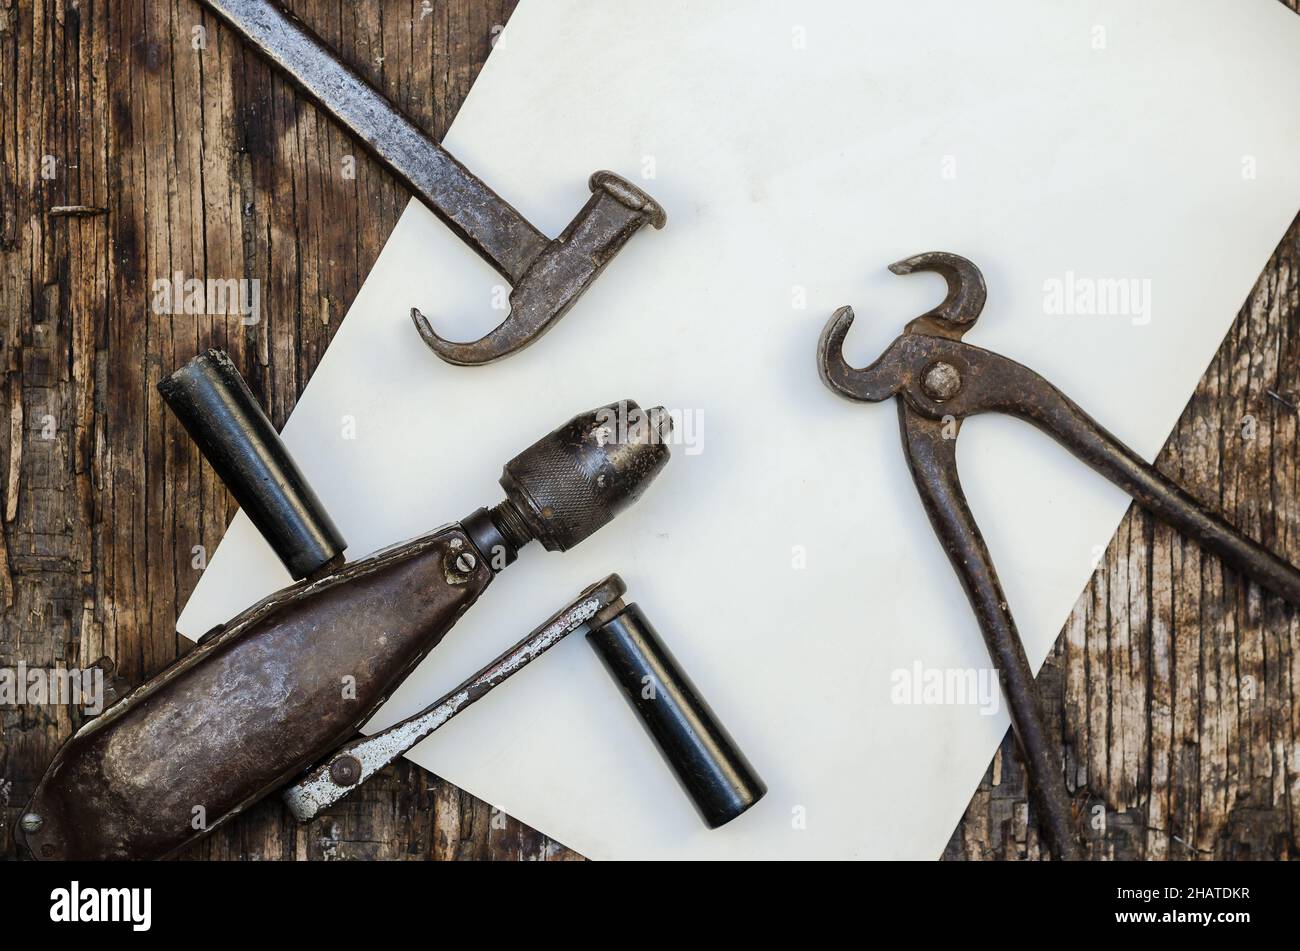 An old hand tool on a cracked wooden surface. Hand drill, hammer and pliers. Top view. Stock Photo